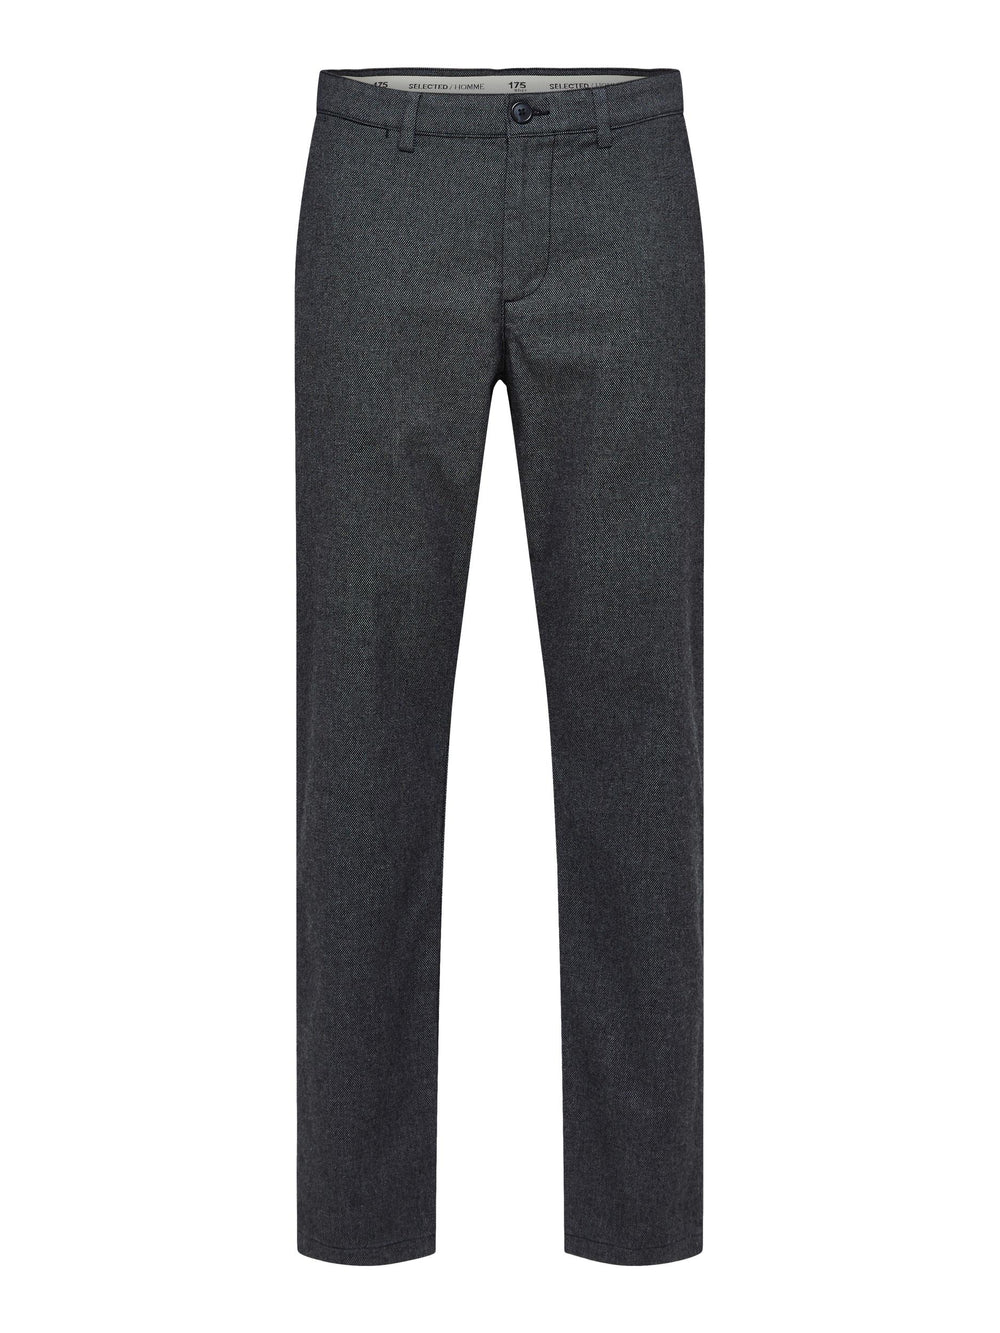 SLHSLIM-MILES Black Brushed Trousers